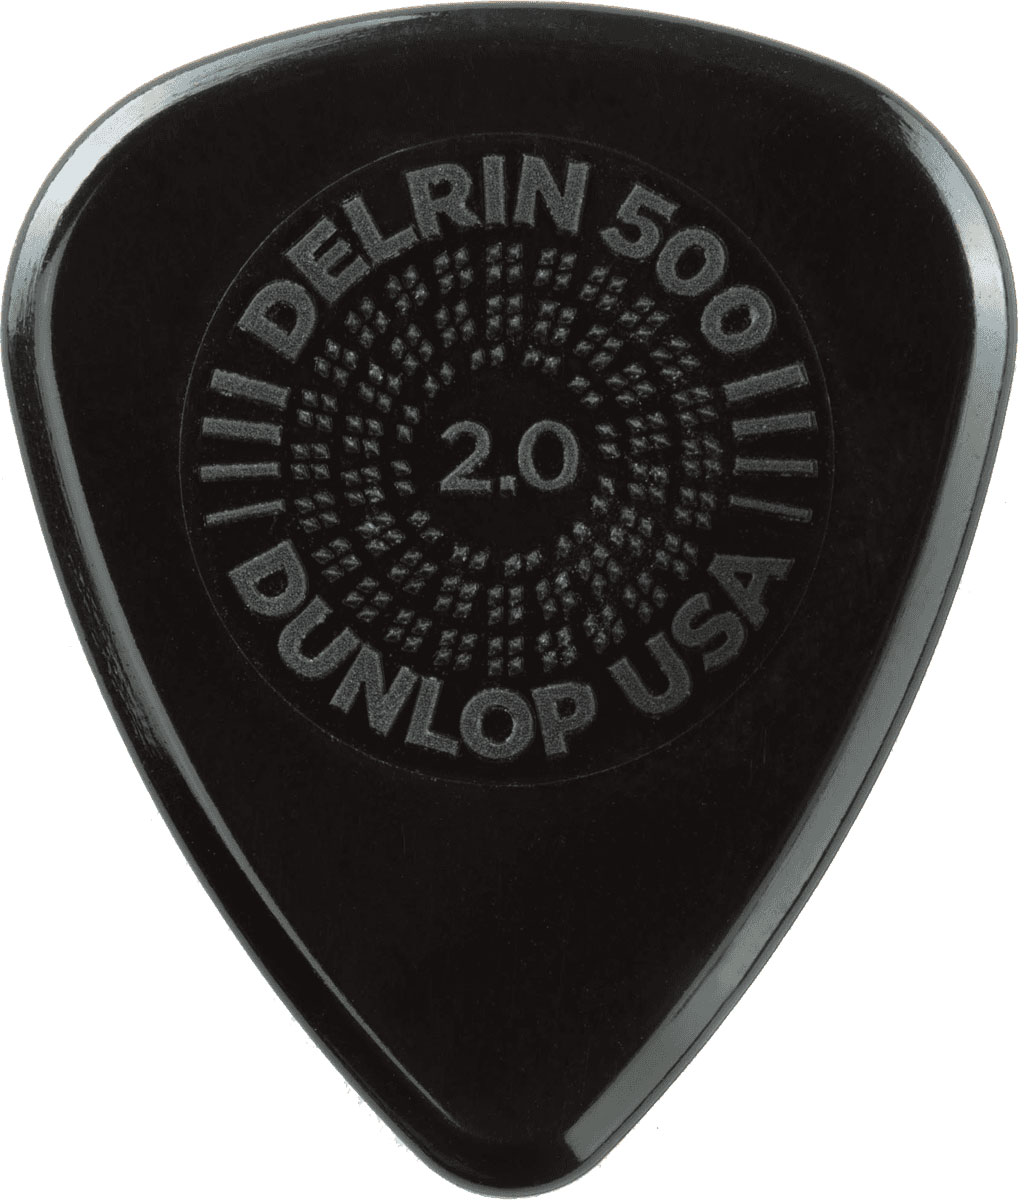 JIM DUNLOP SPECIALTY DELRIN 500 PRIME GRIP 2,00MM X 12